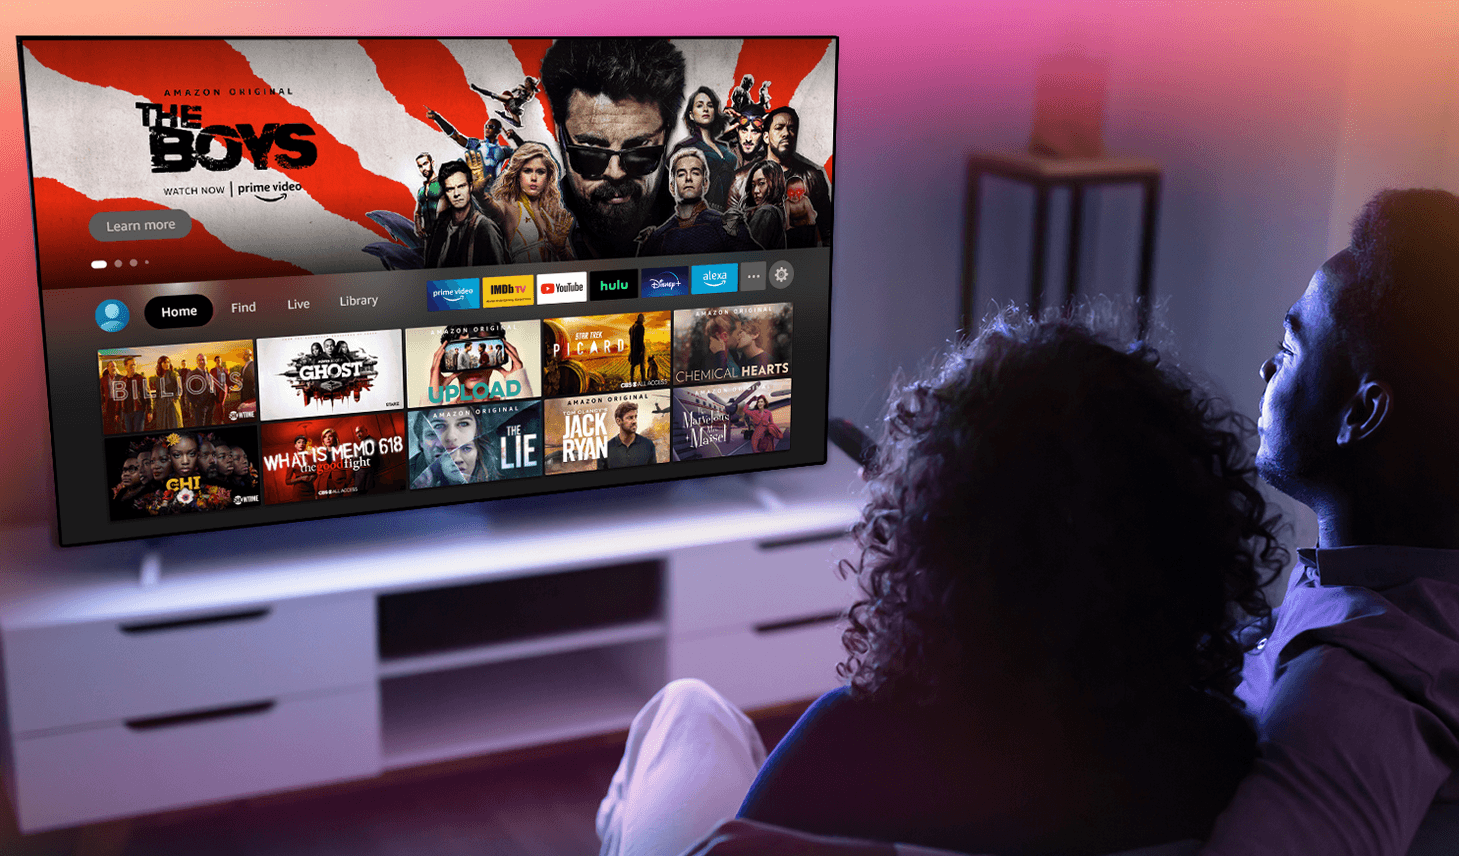 10 FREE Fire TV Apps for TV, Movies, News, Music & Weather